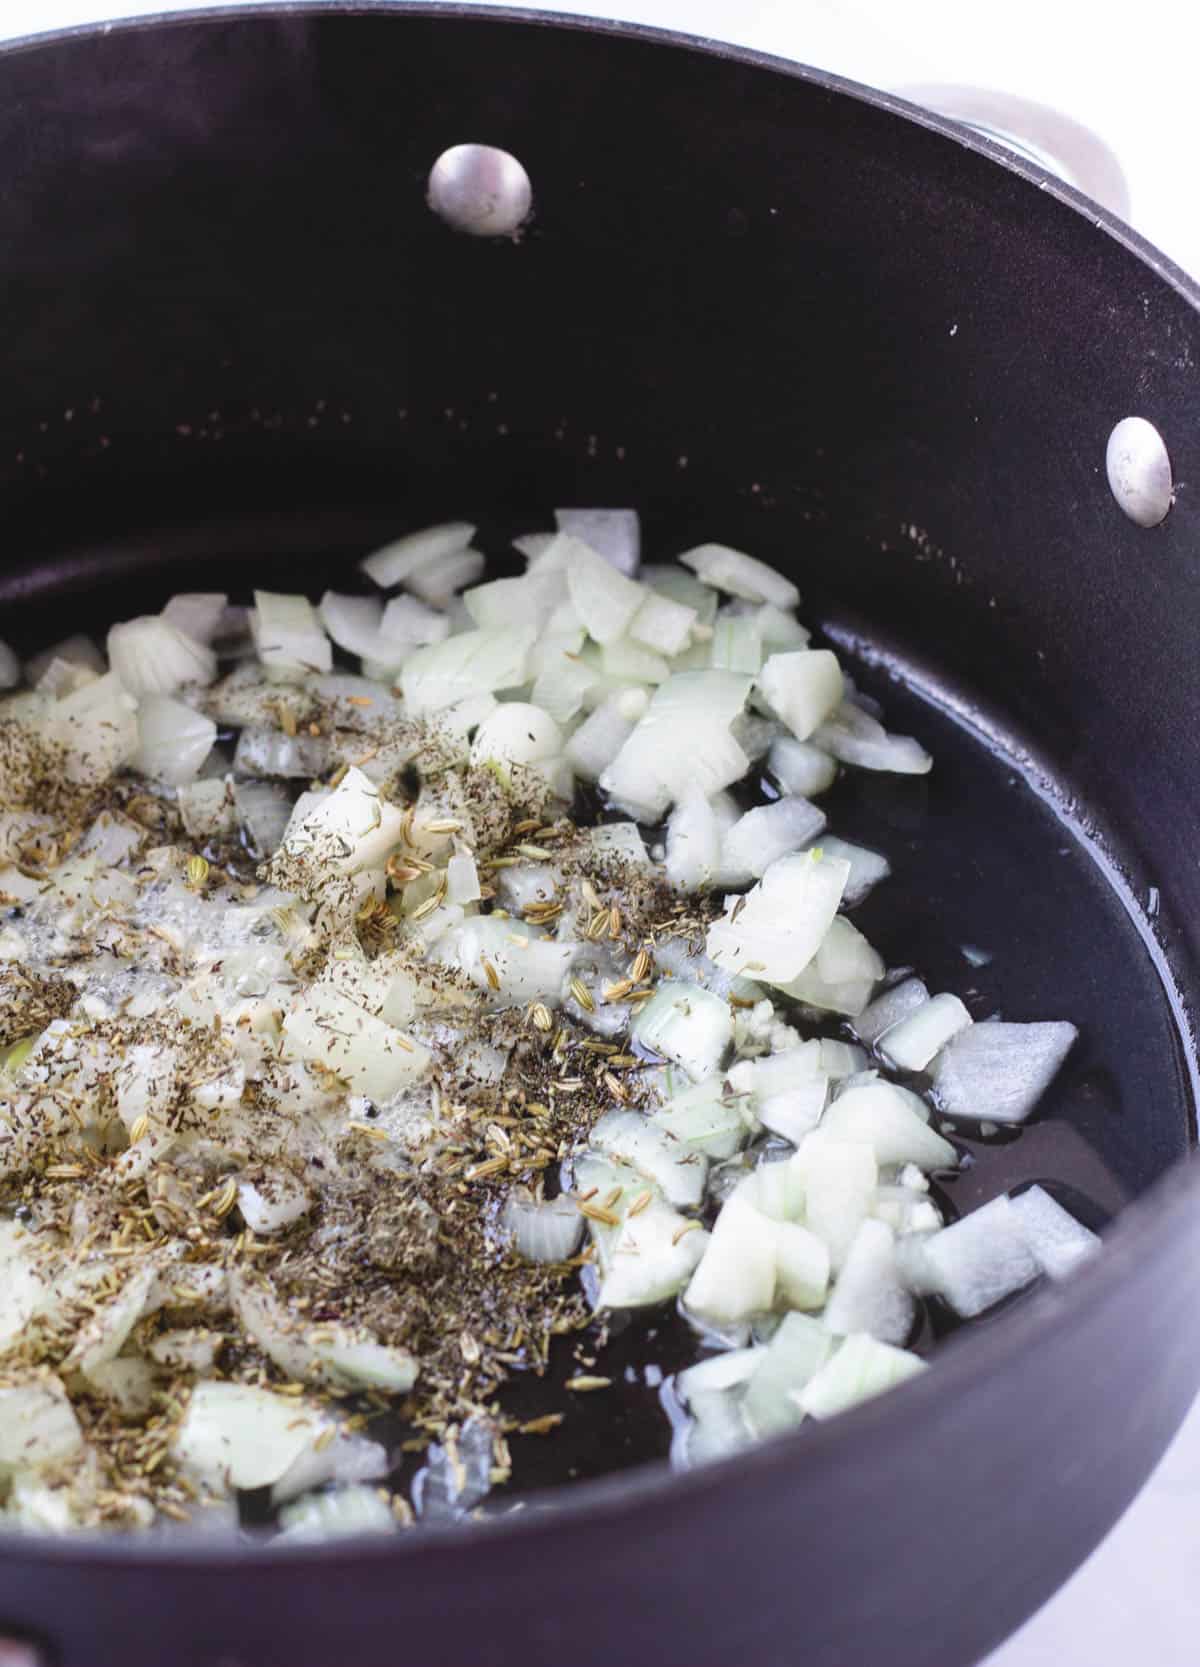 onions, garlic, and herbs in pan